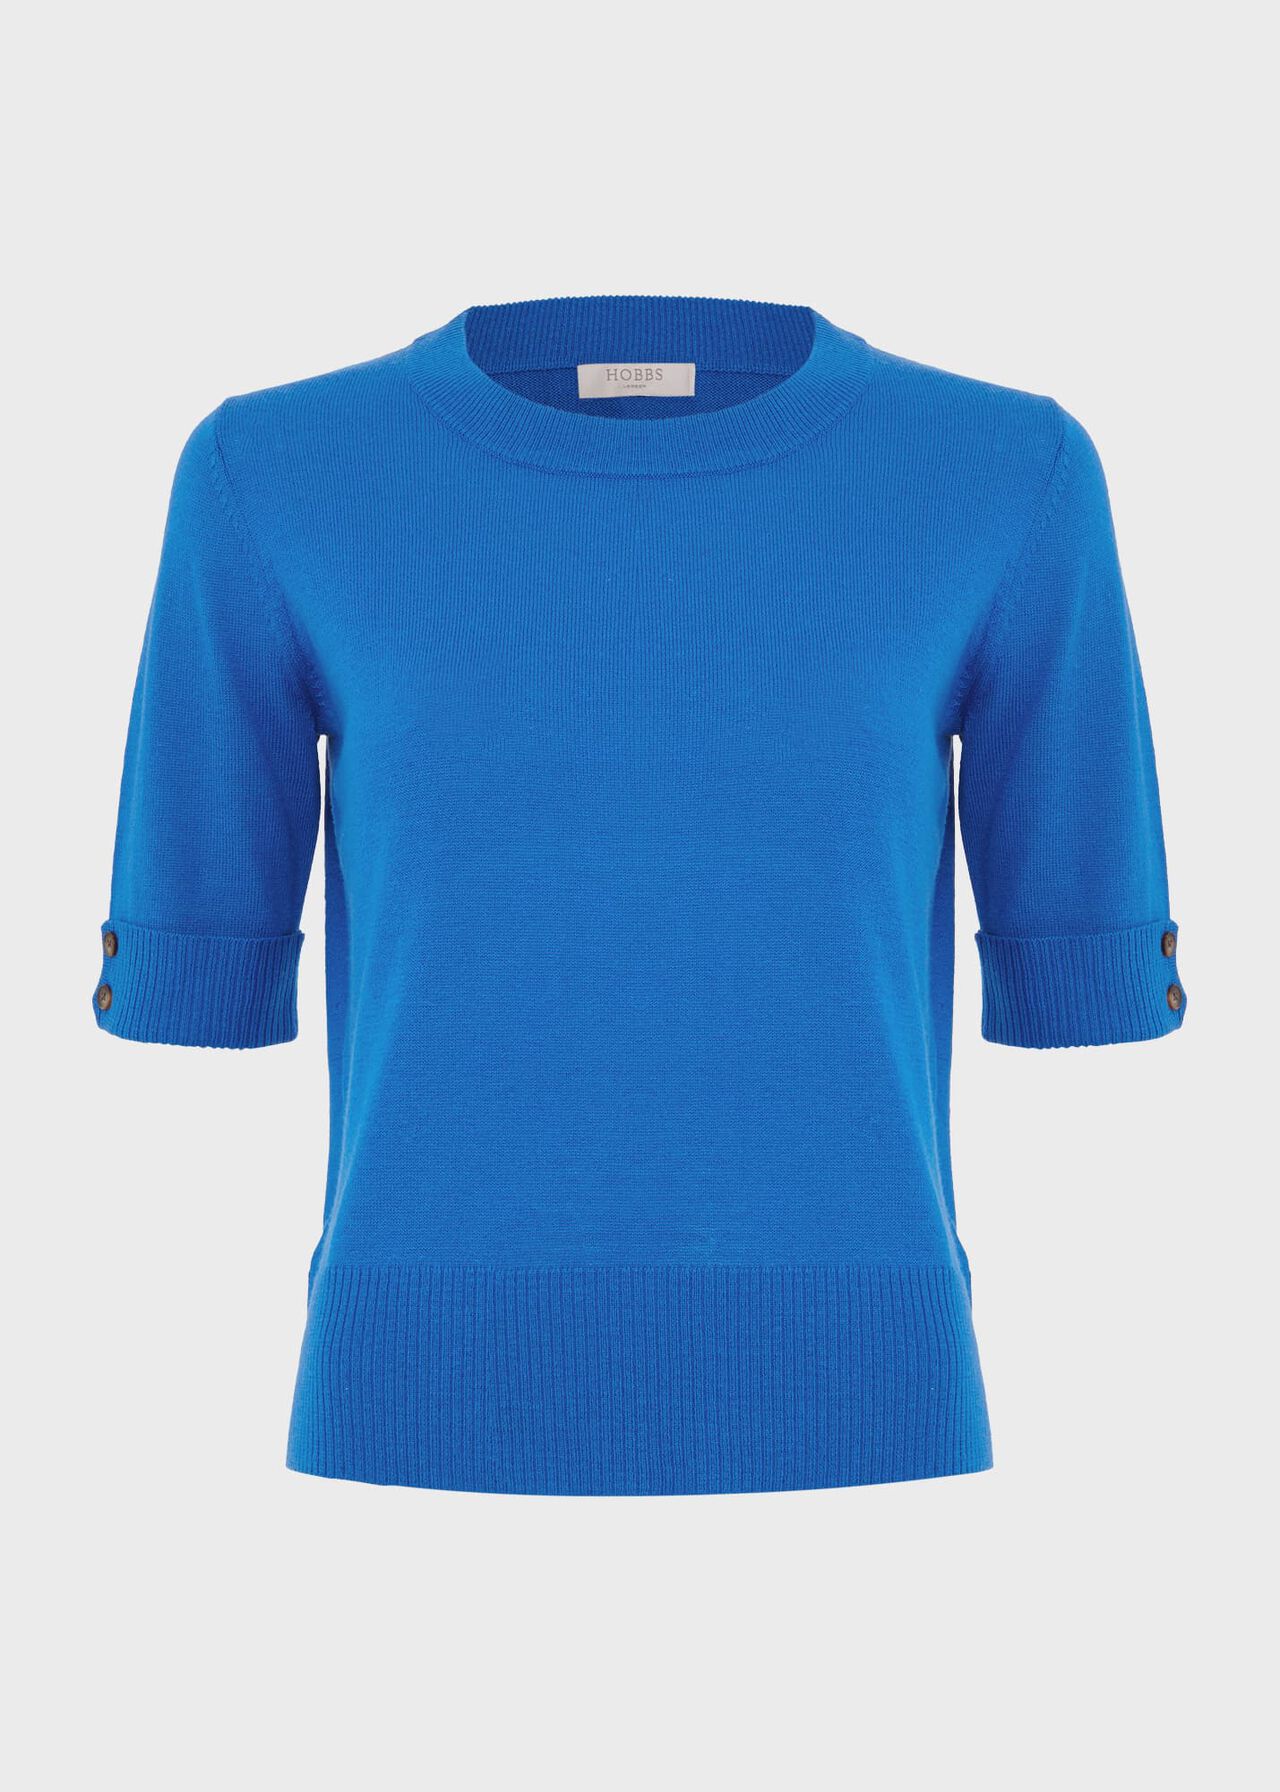 Leanne Knitted Top With Wool, Atlantic Blue, hi-res